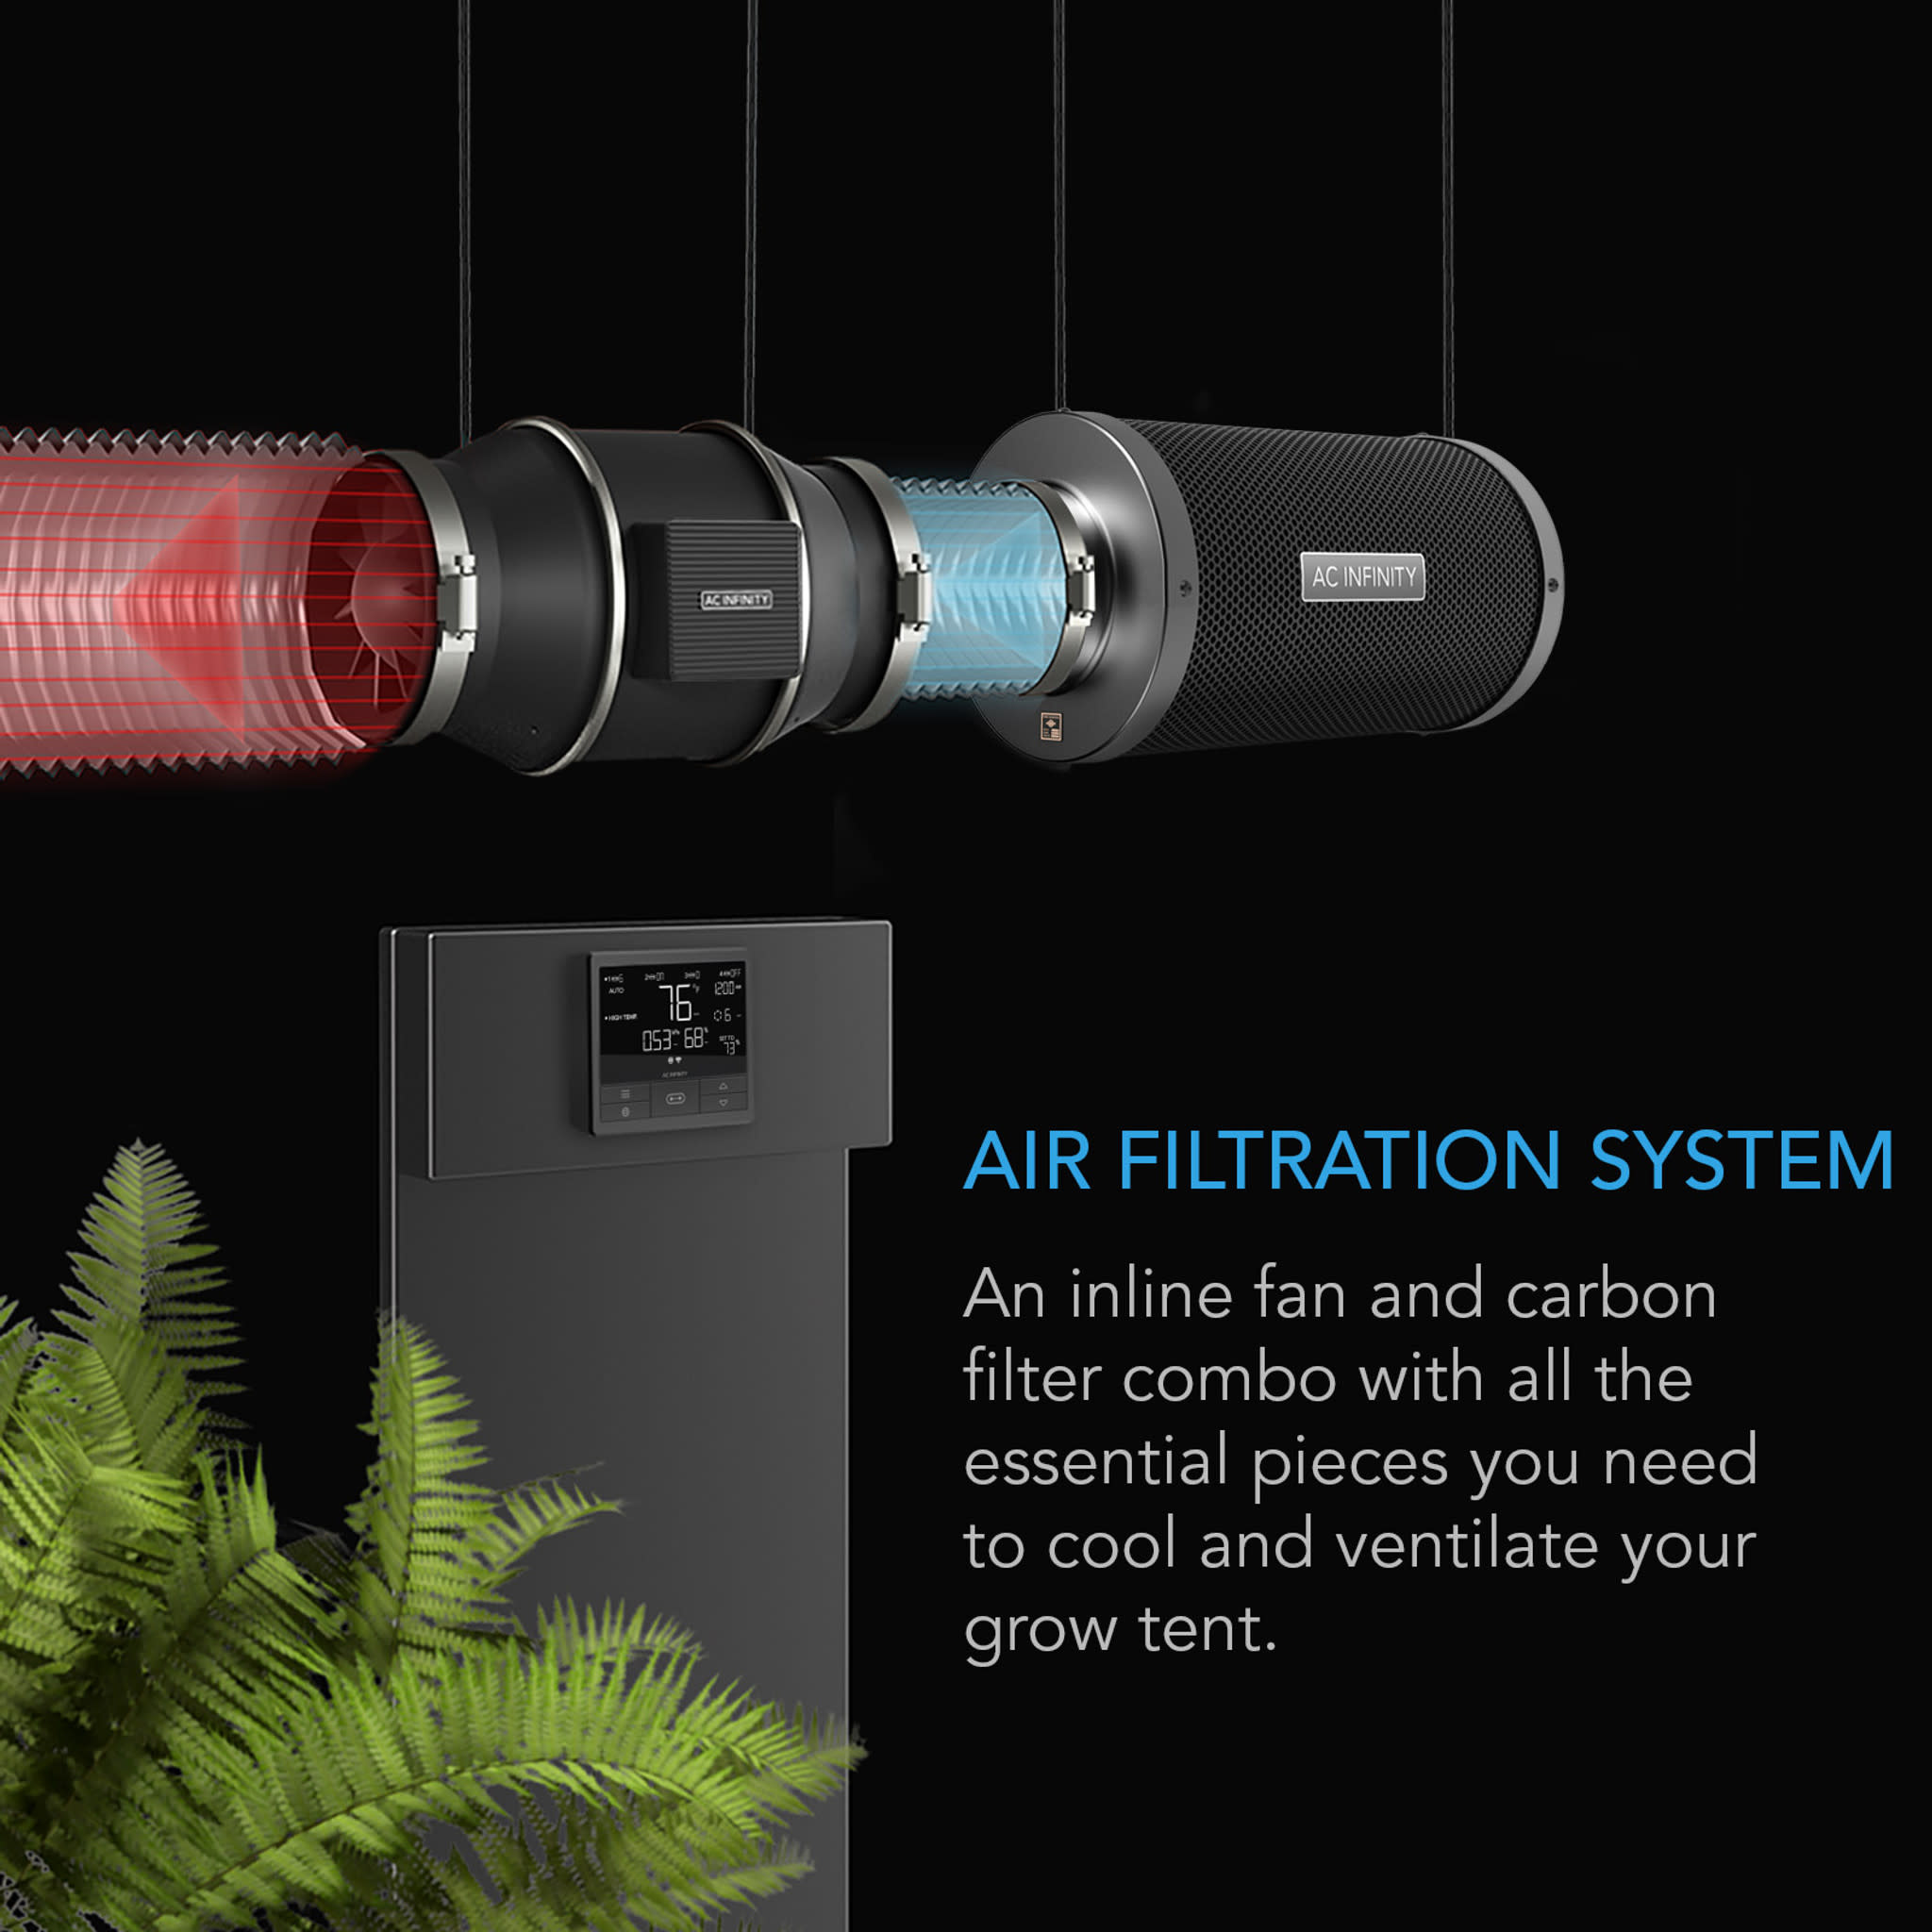 AC INFINITY AIR FILTRATION KIT PRO 8, Inline Fan, Smart Controller, Carbon  Filter & Ducting Combo - Year-Round Garden